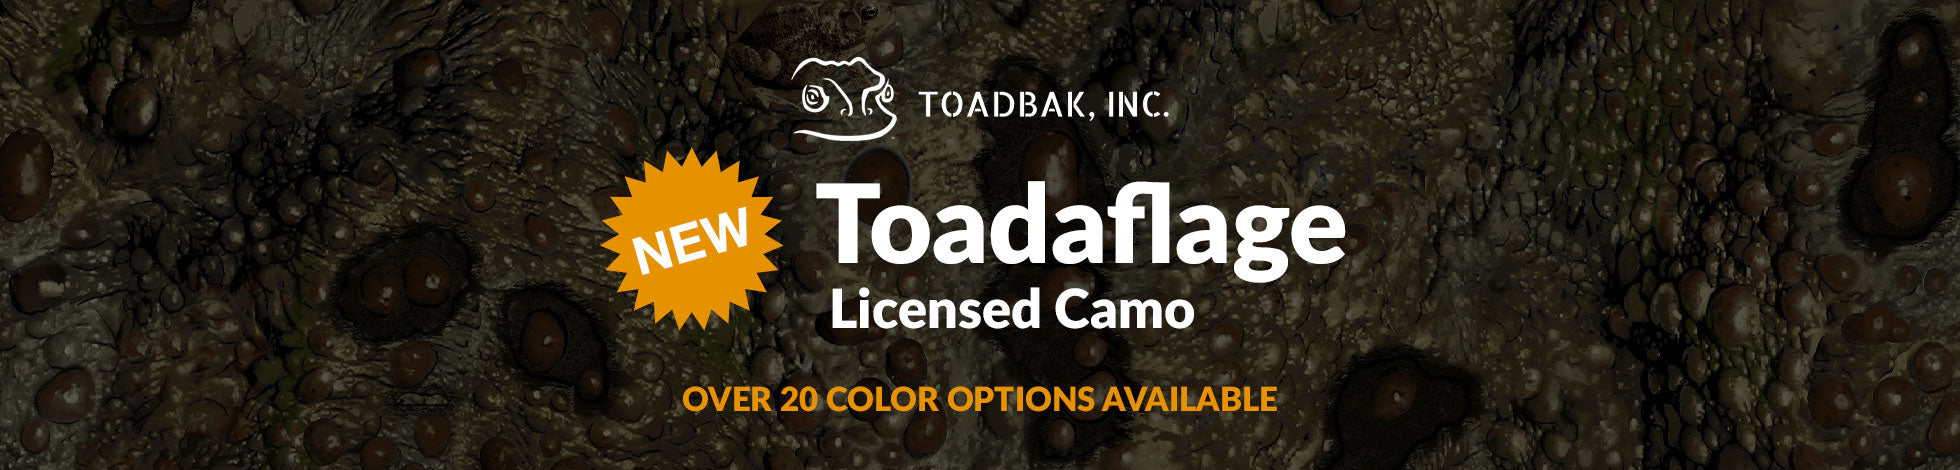 New Camo Release: Toadaflage